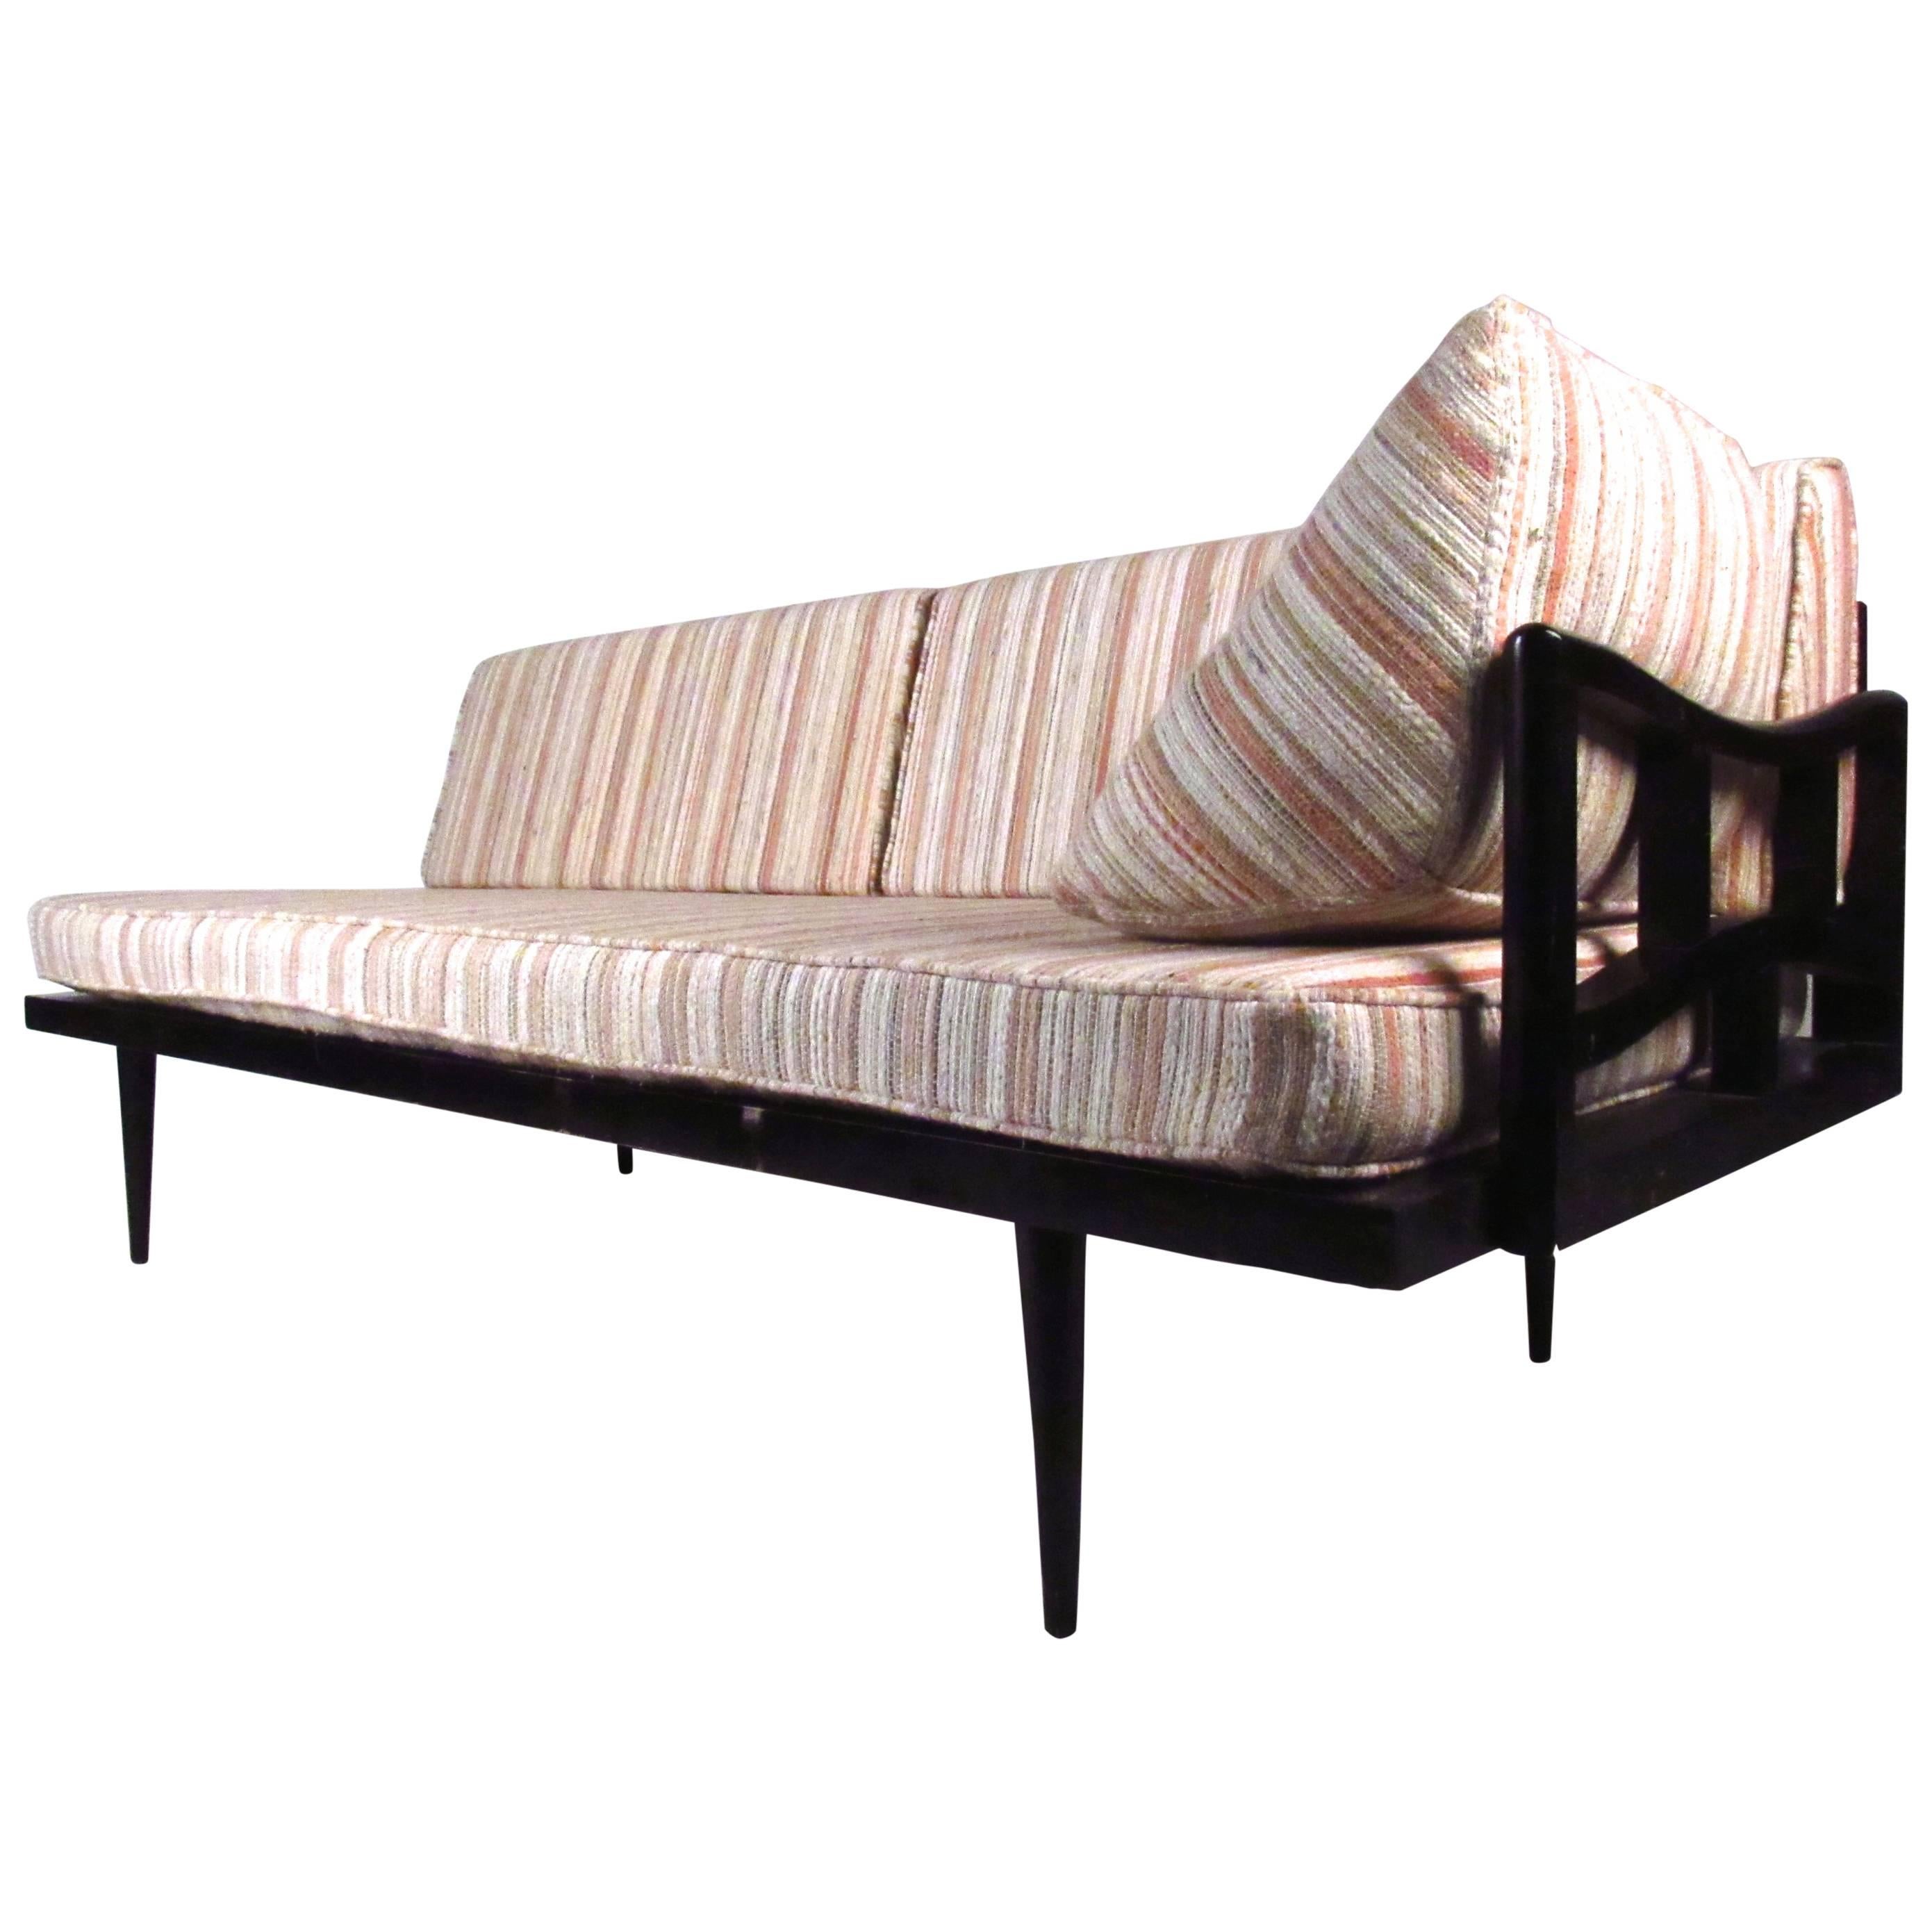 Unique Mid-Century Modern Daybed Settee